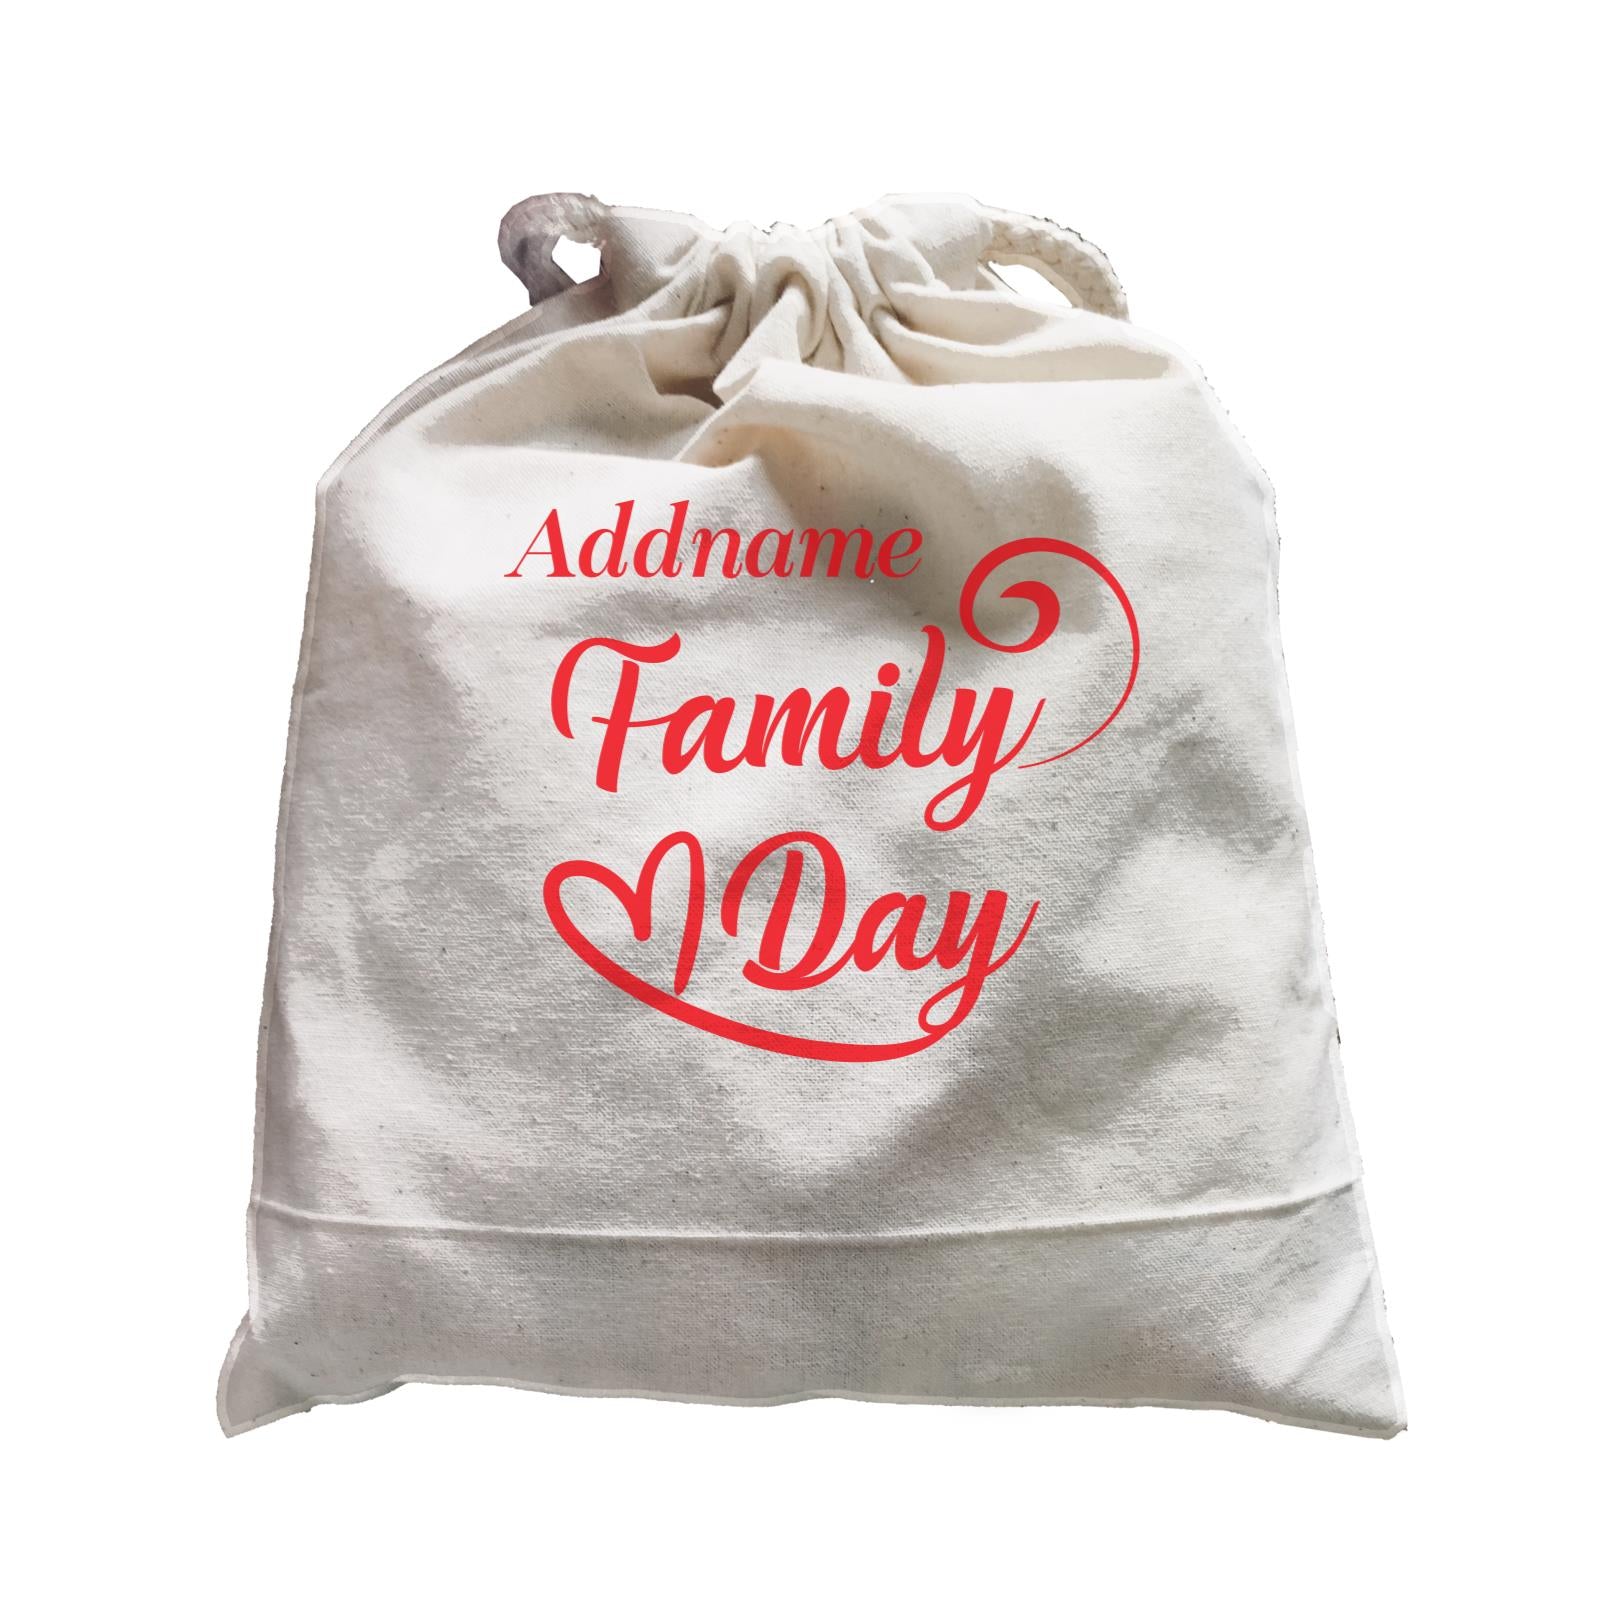 Family Day Love Curve Family Day Addname Satchel